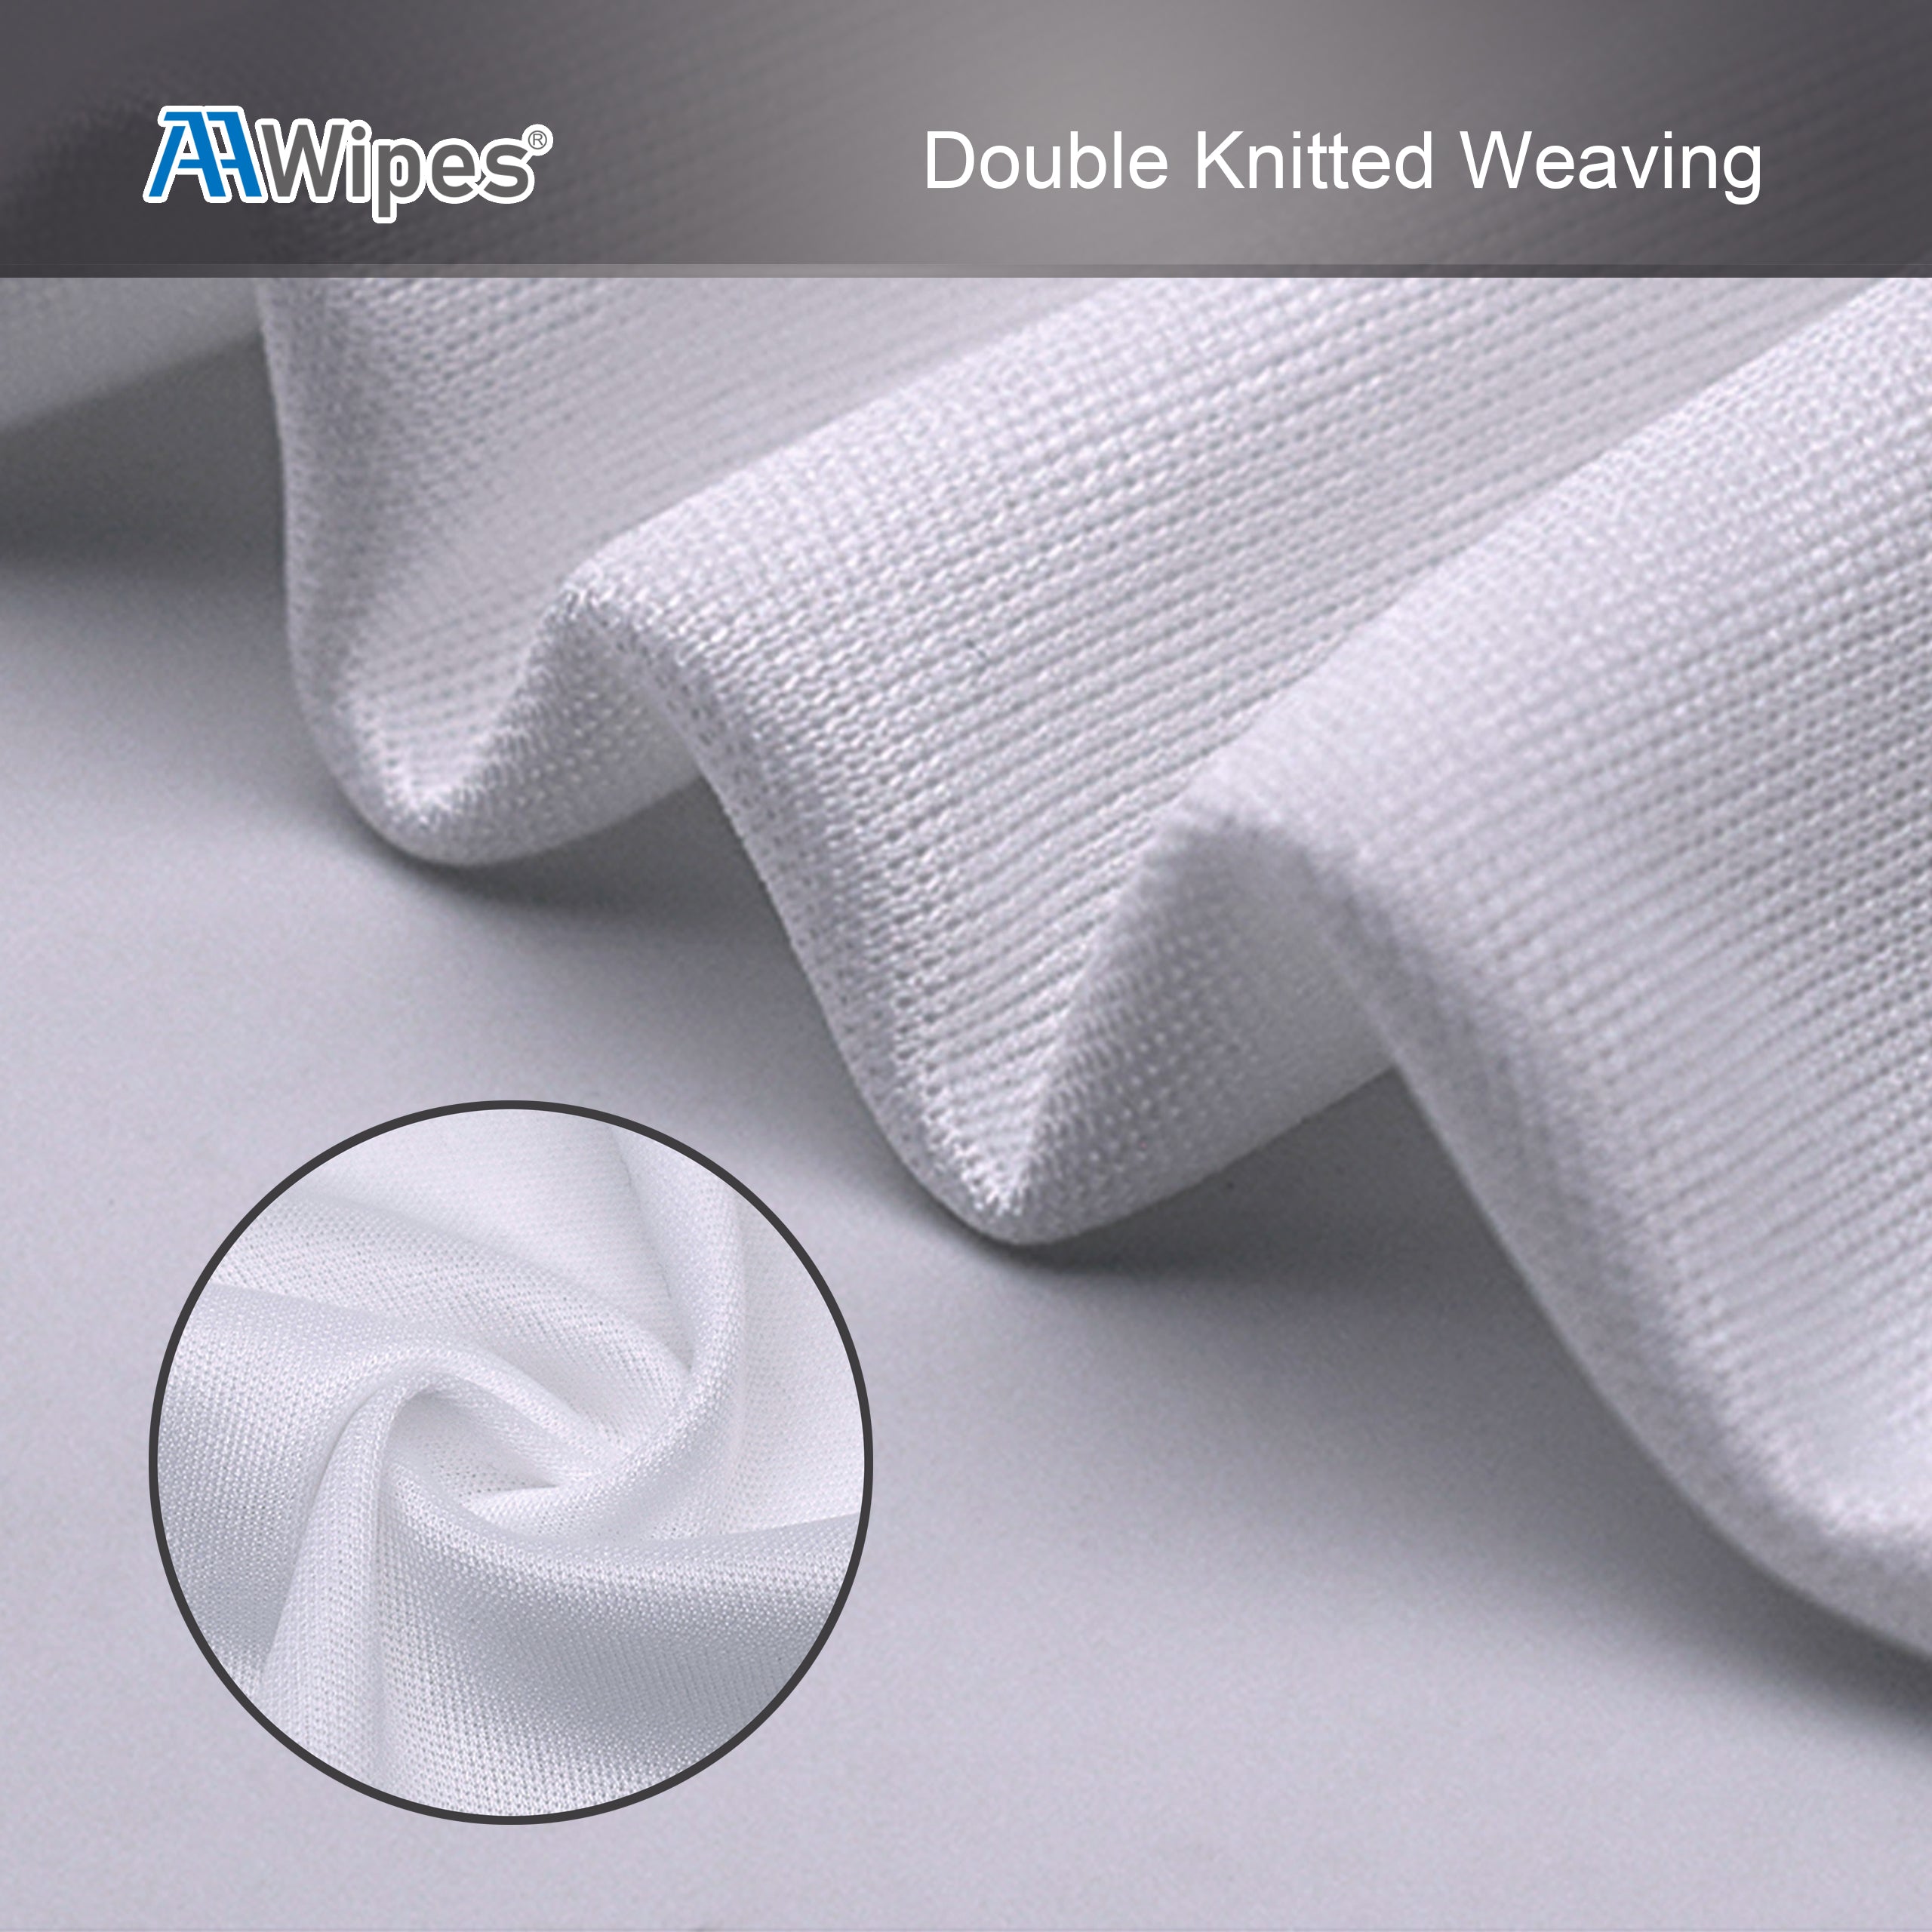 Cleanroom Double Knit 100% Polyester Wipers 6"x6" (1 Case with 15,000 Wipes per 100 Bags) (No. CP14006)